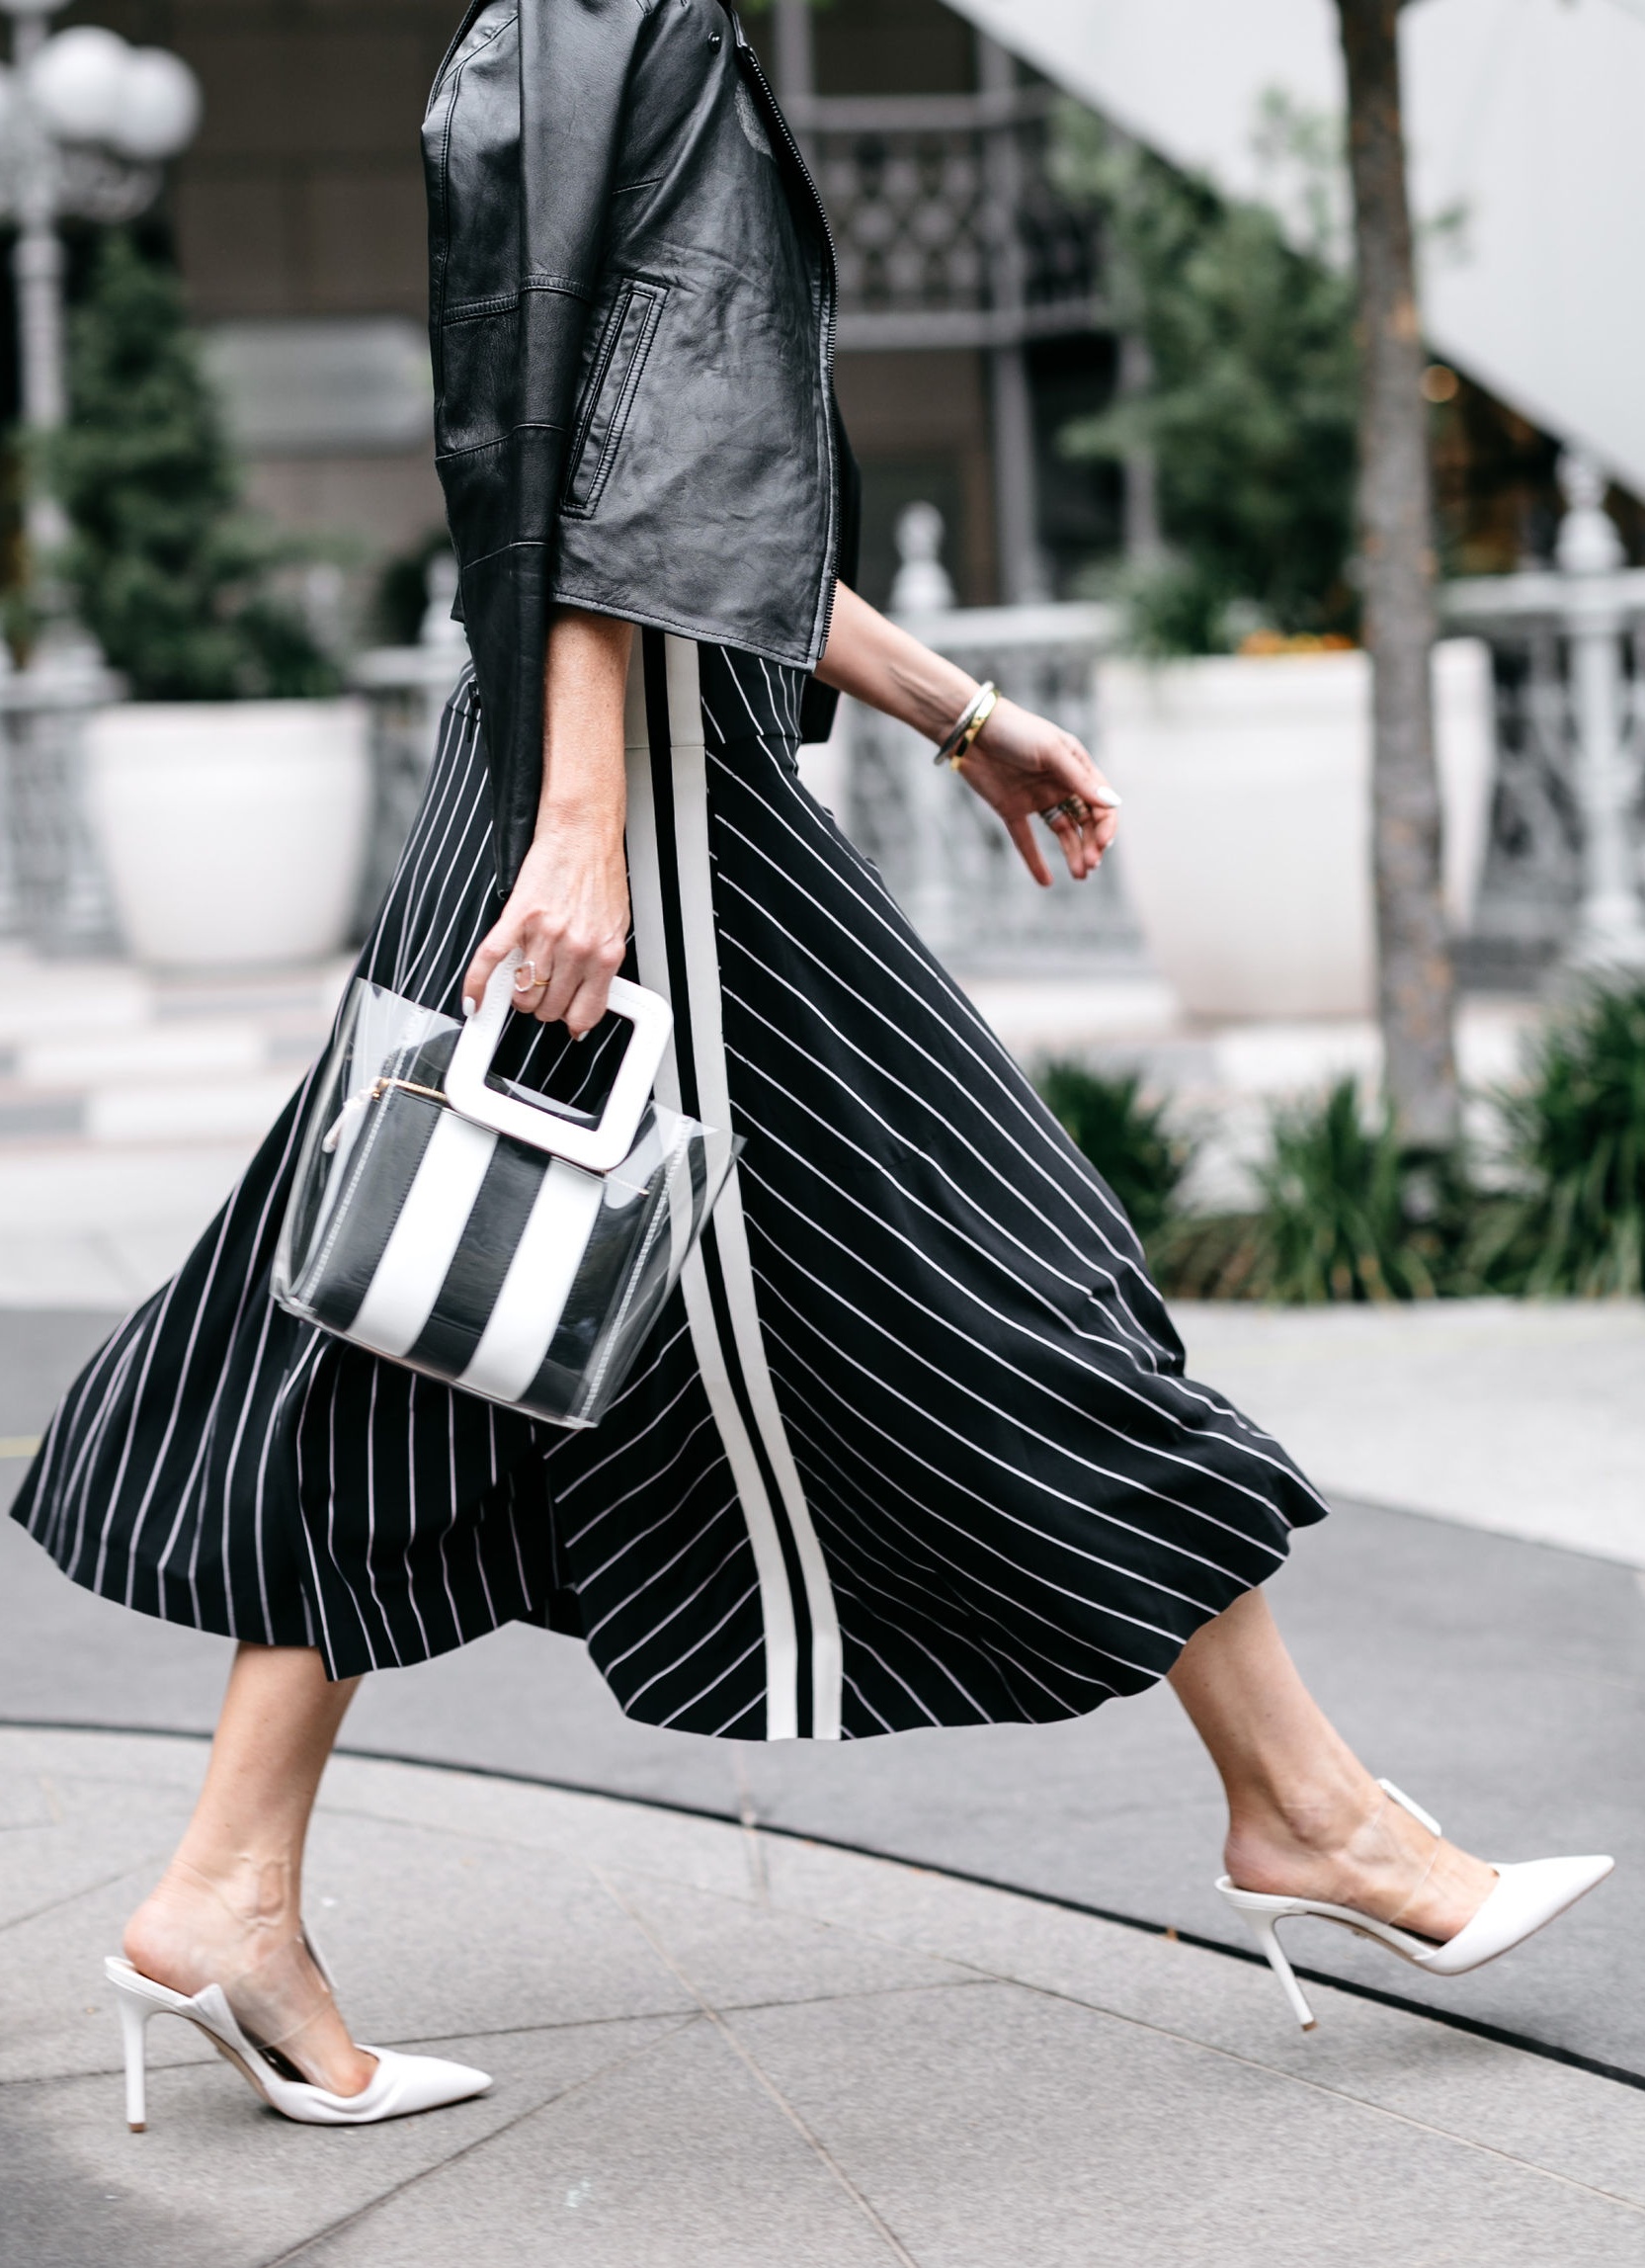 How To Mix Prints, Fashion blogger Erin Busbee of BusbeeStyle.com wearing a striped Norma Kamali skirt, white Sam Edelman Hope Pumps, white LNA tee, black and white striped Staud shirley tote, and Joie black leather jacket in Dallas, Texas at the rewardStyle Conference